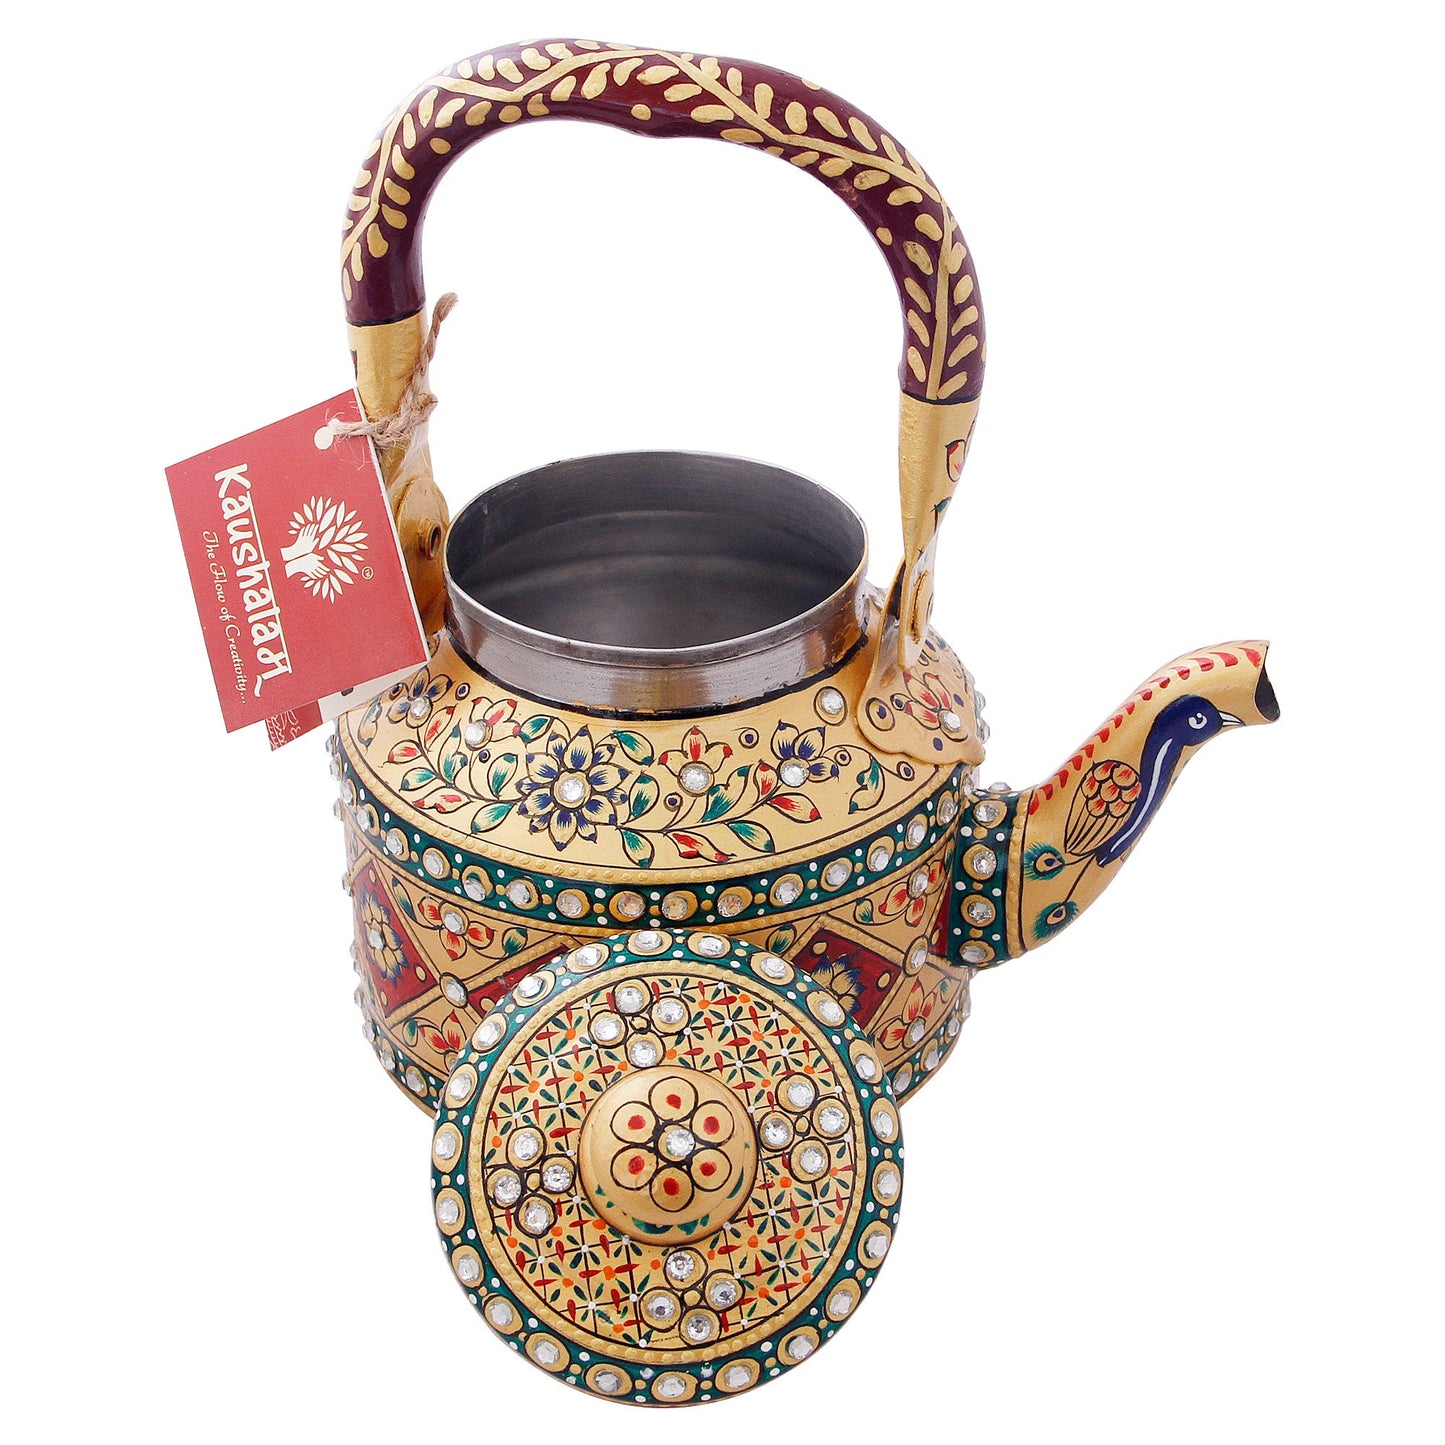 "Dazzle "-Hand Painted Tea Kettle Stainless steel